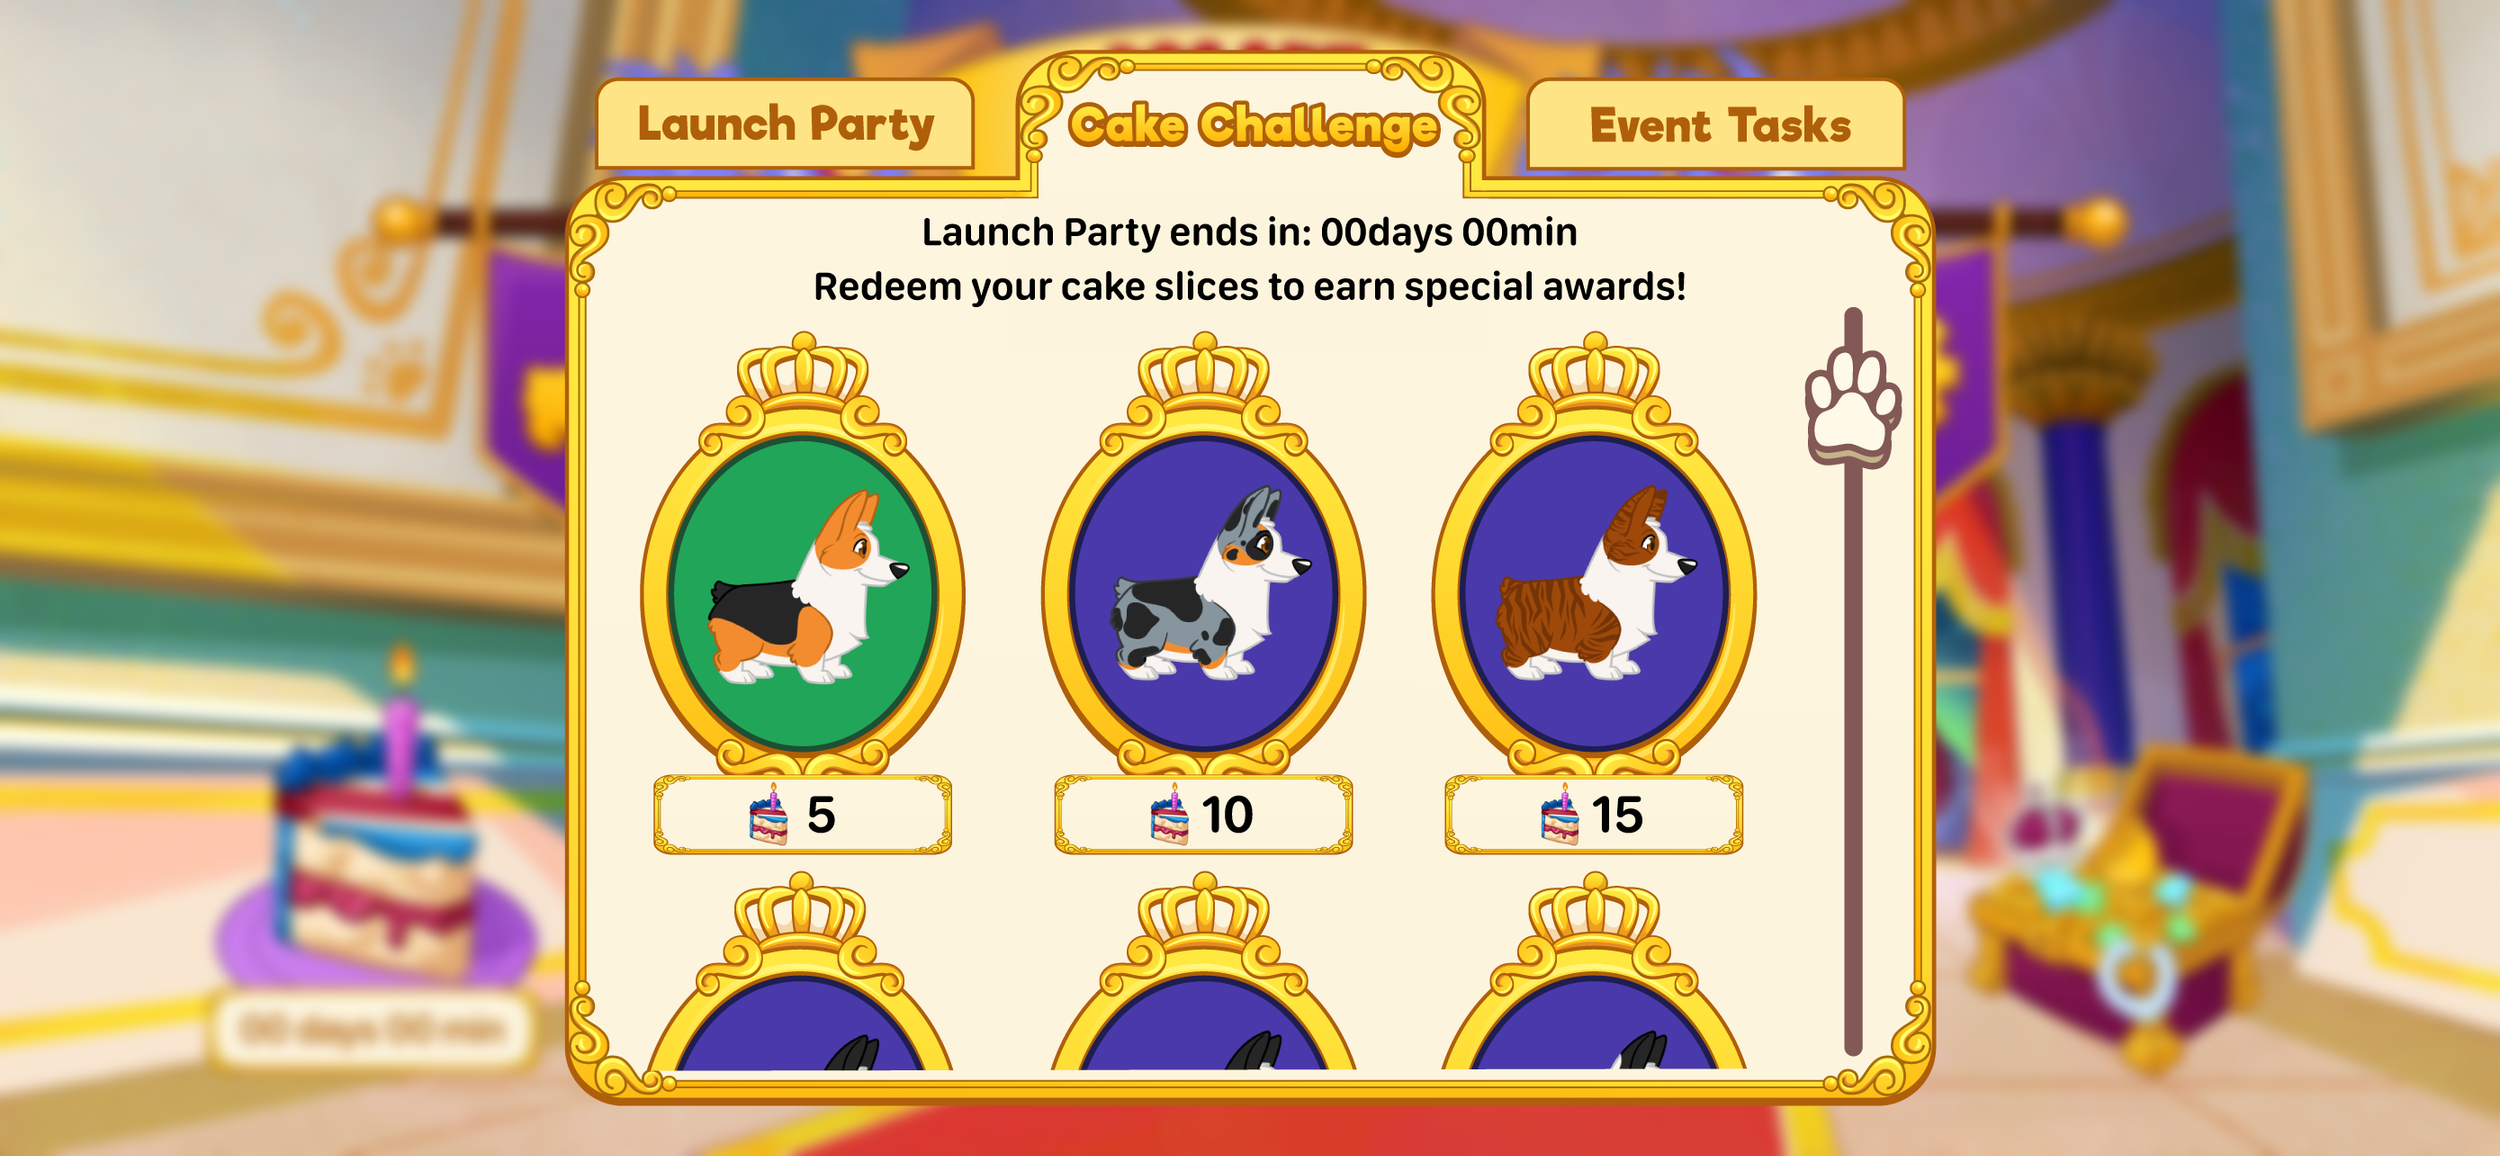 Event_LaunchParty_CakeChallenge.png